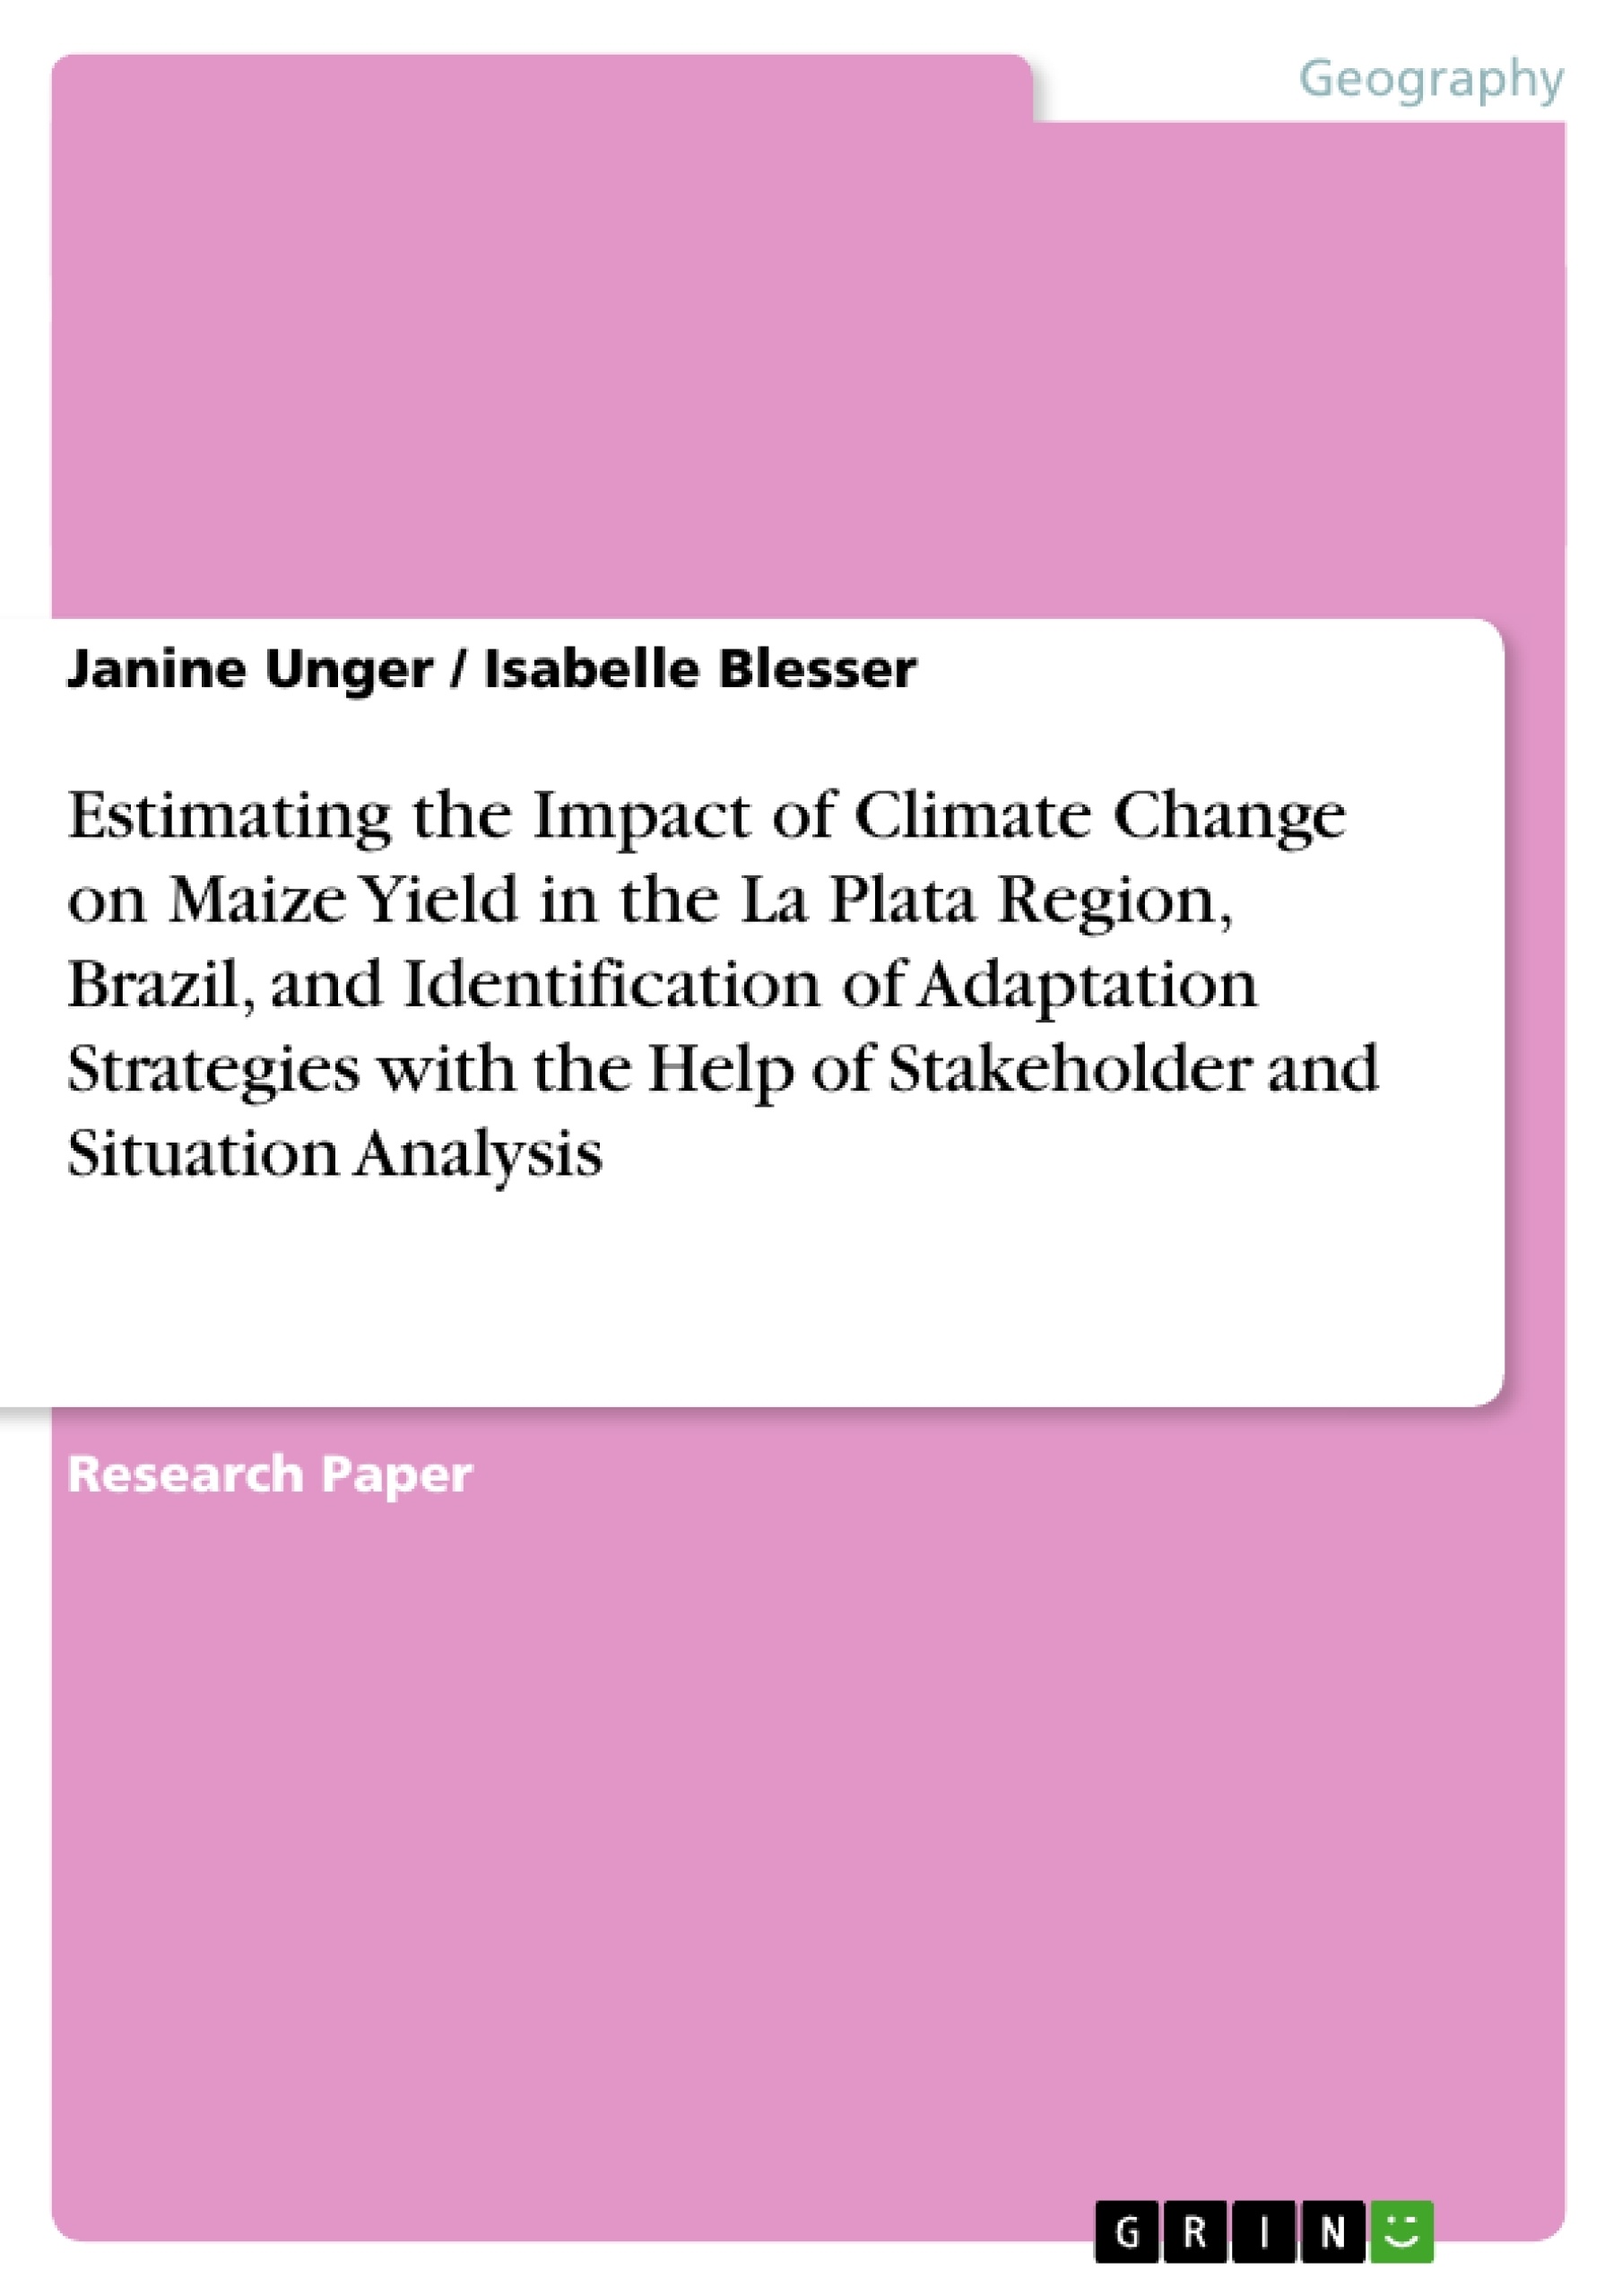 Title: Estimating the Impact of Climate Change on Maize Yield in the La Plata Region, Brazil, and Identification of Adaptation Strategies with the Help of Stakeholder and Situation Analysis